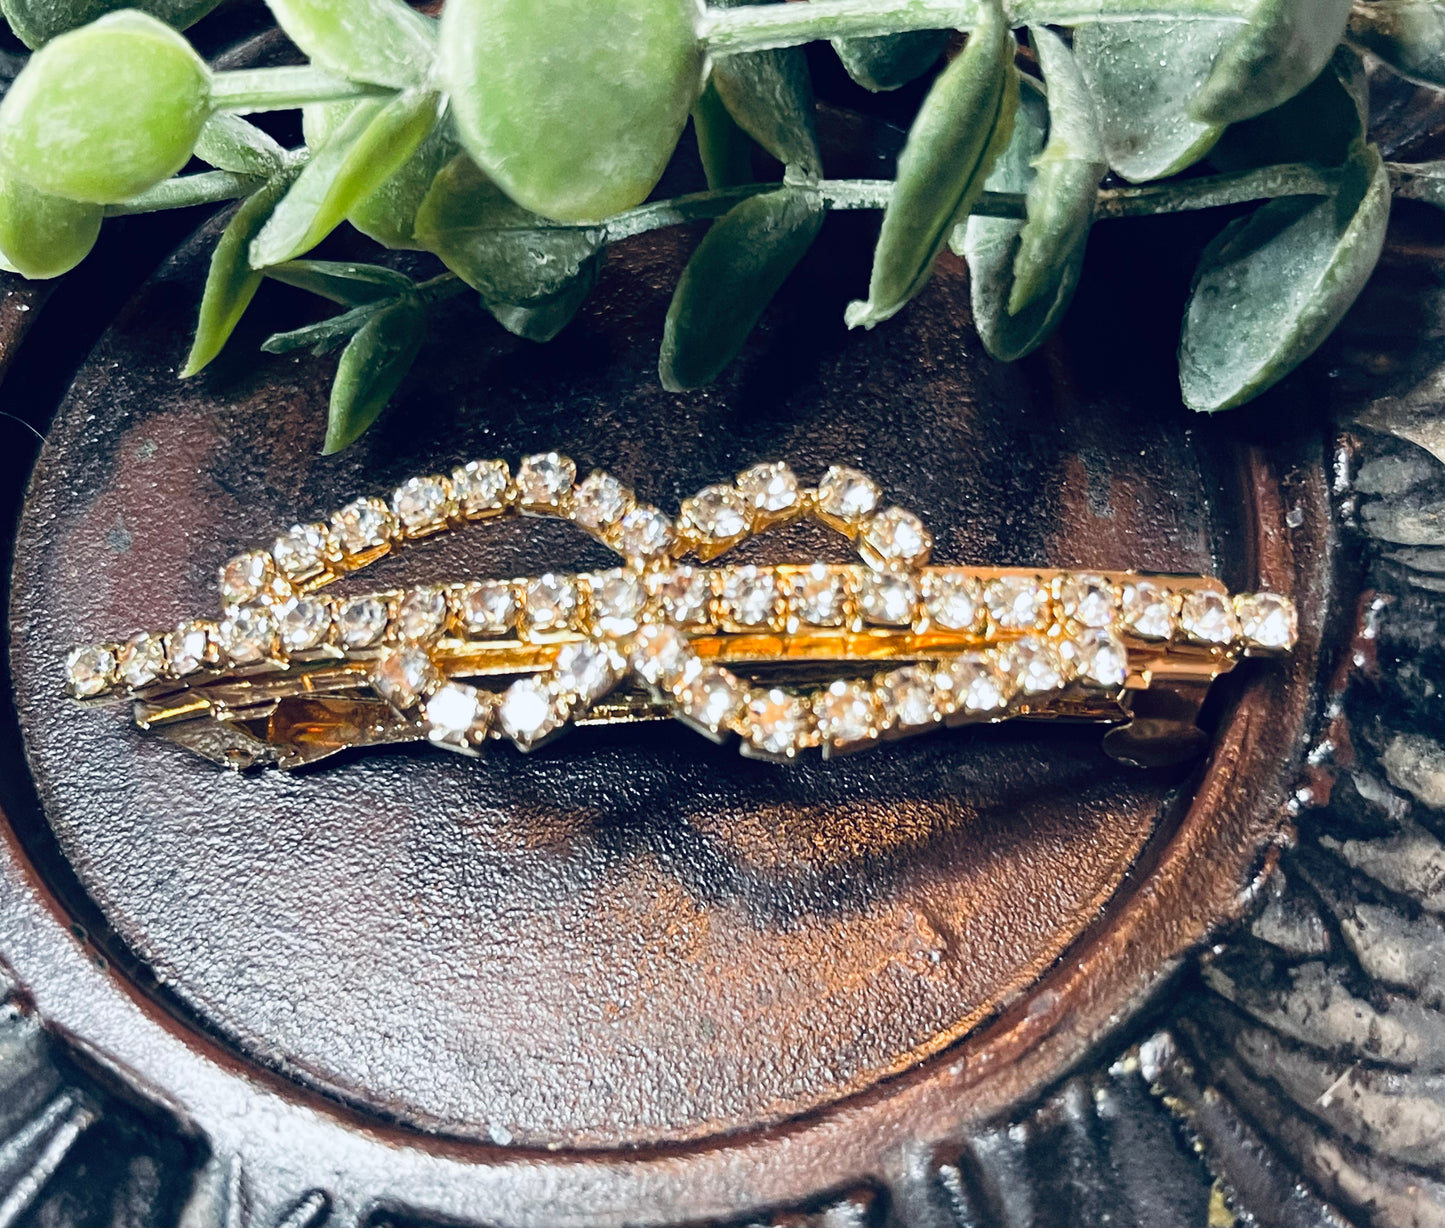 Clear Crystal rhinestone barrette approximately 3.0” gold tone formal hair accessories gift wedding bridesmaid